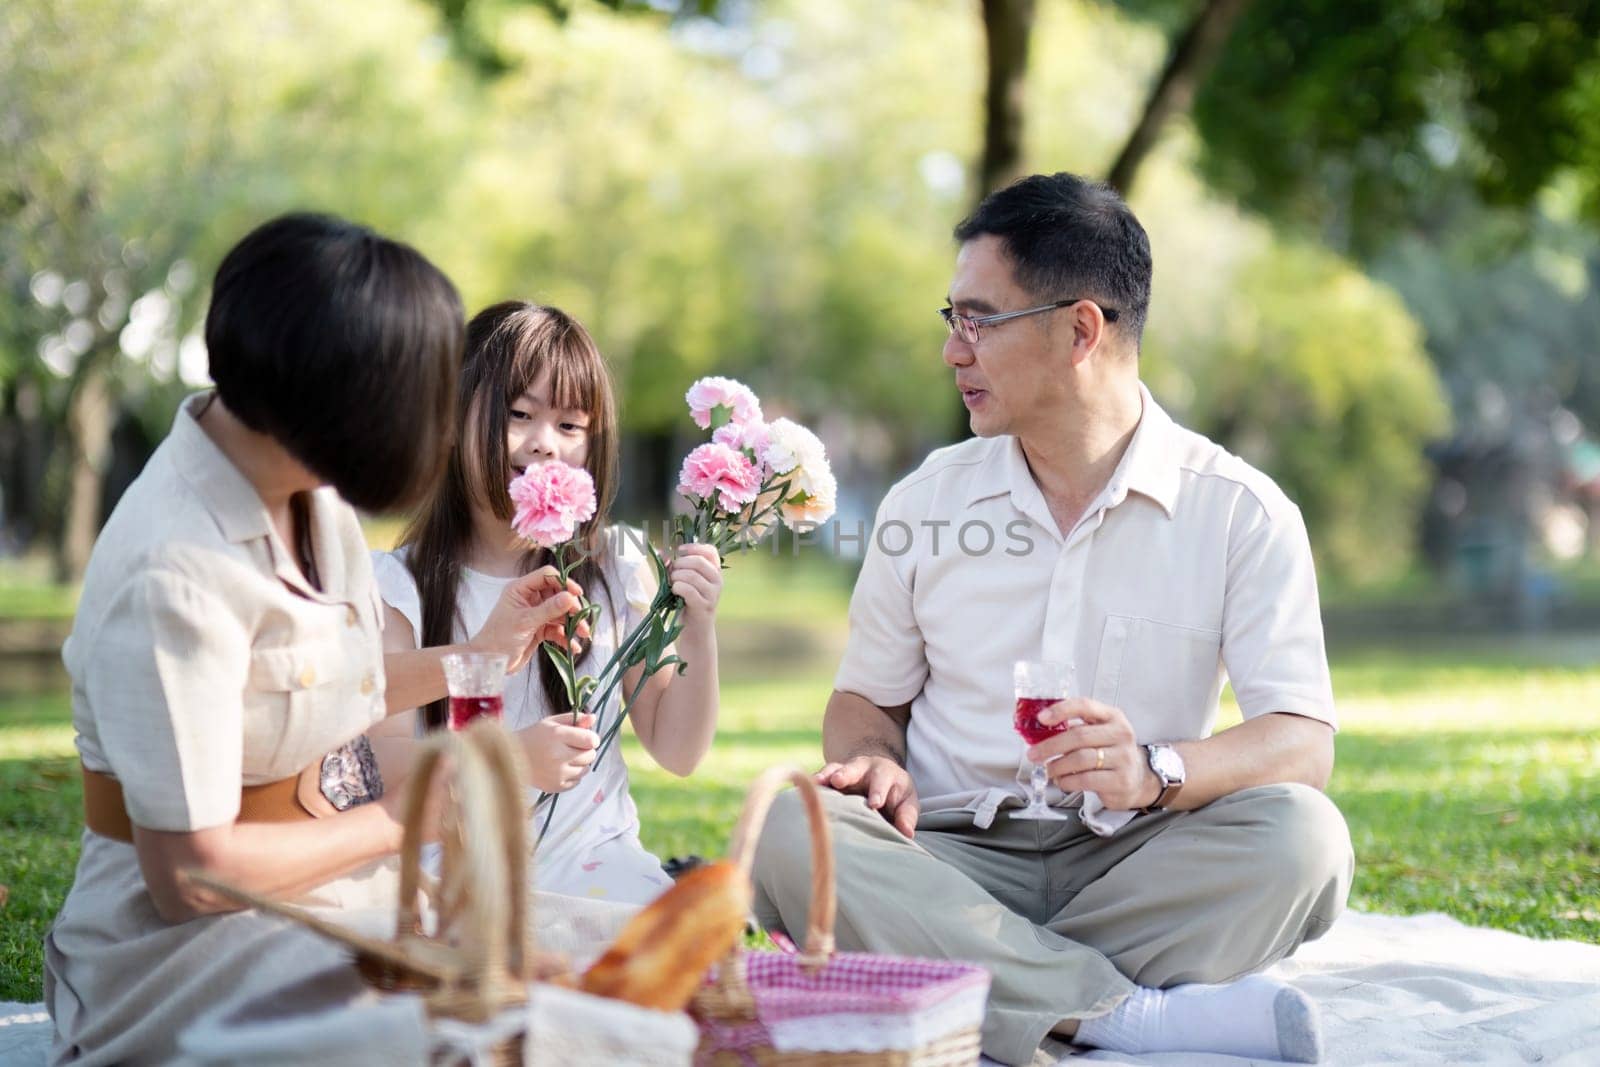 Grandparents enjoying with granddaughter in park and serenity. They are having joyful and cheerful time together. Loads of smile and happy moment by nateemee